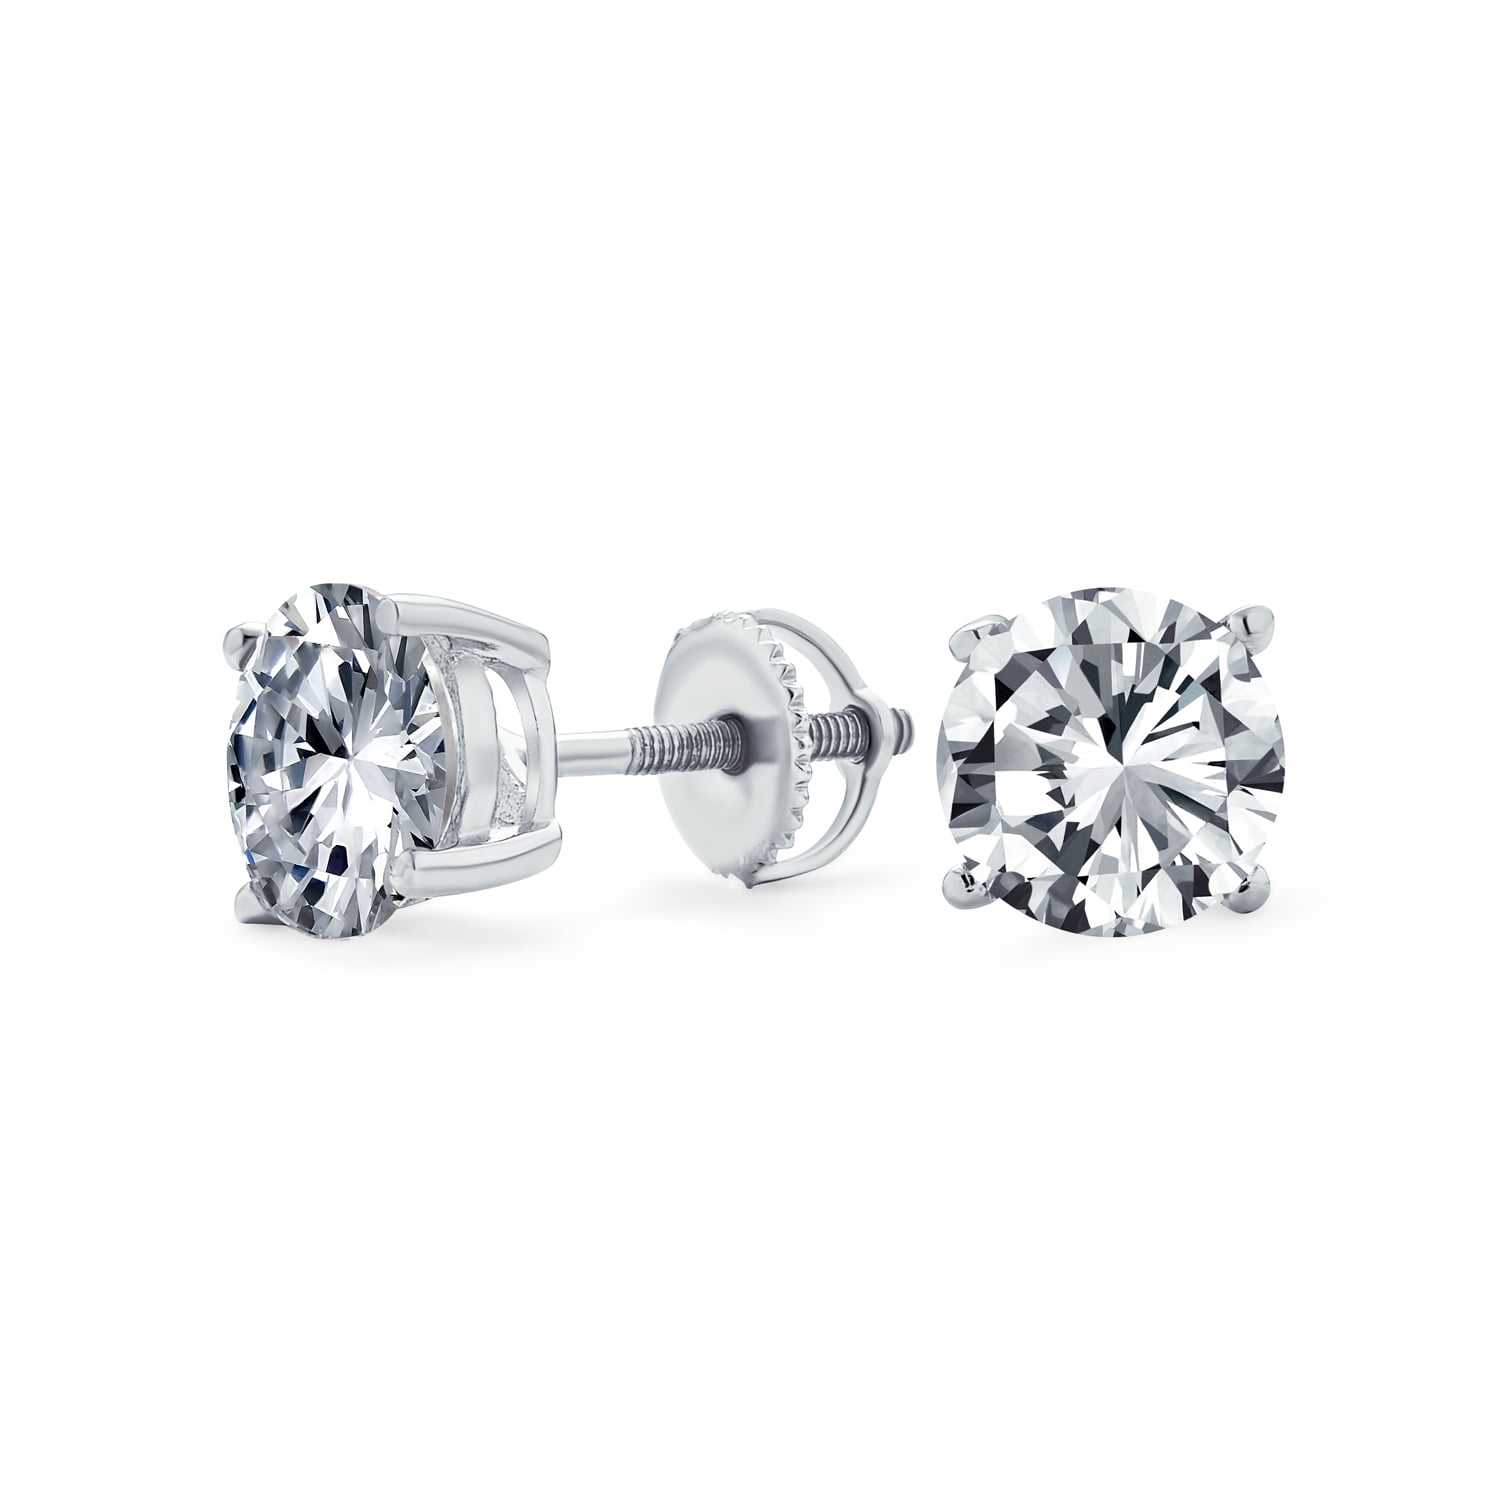 Round Brilliant Cut Cubic Zirconia CZ Crystal .925 Sterling Silver Stud Earrings 